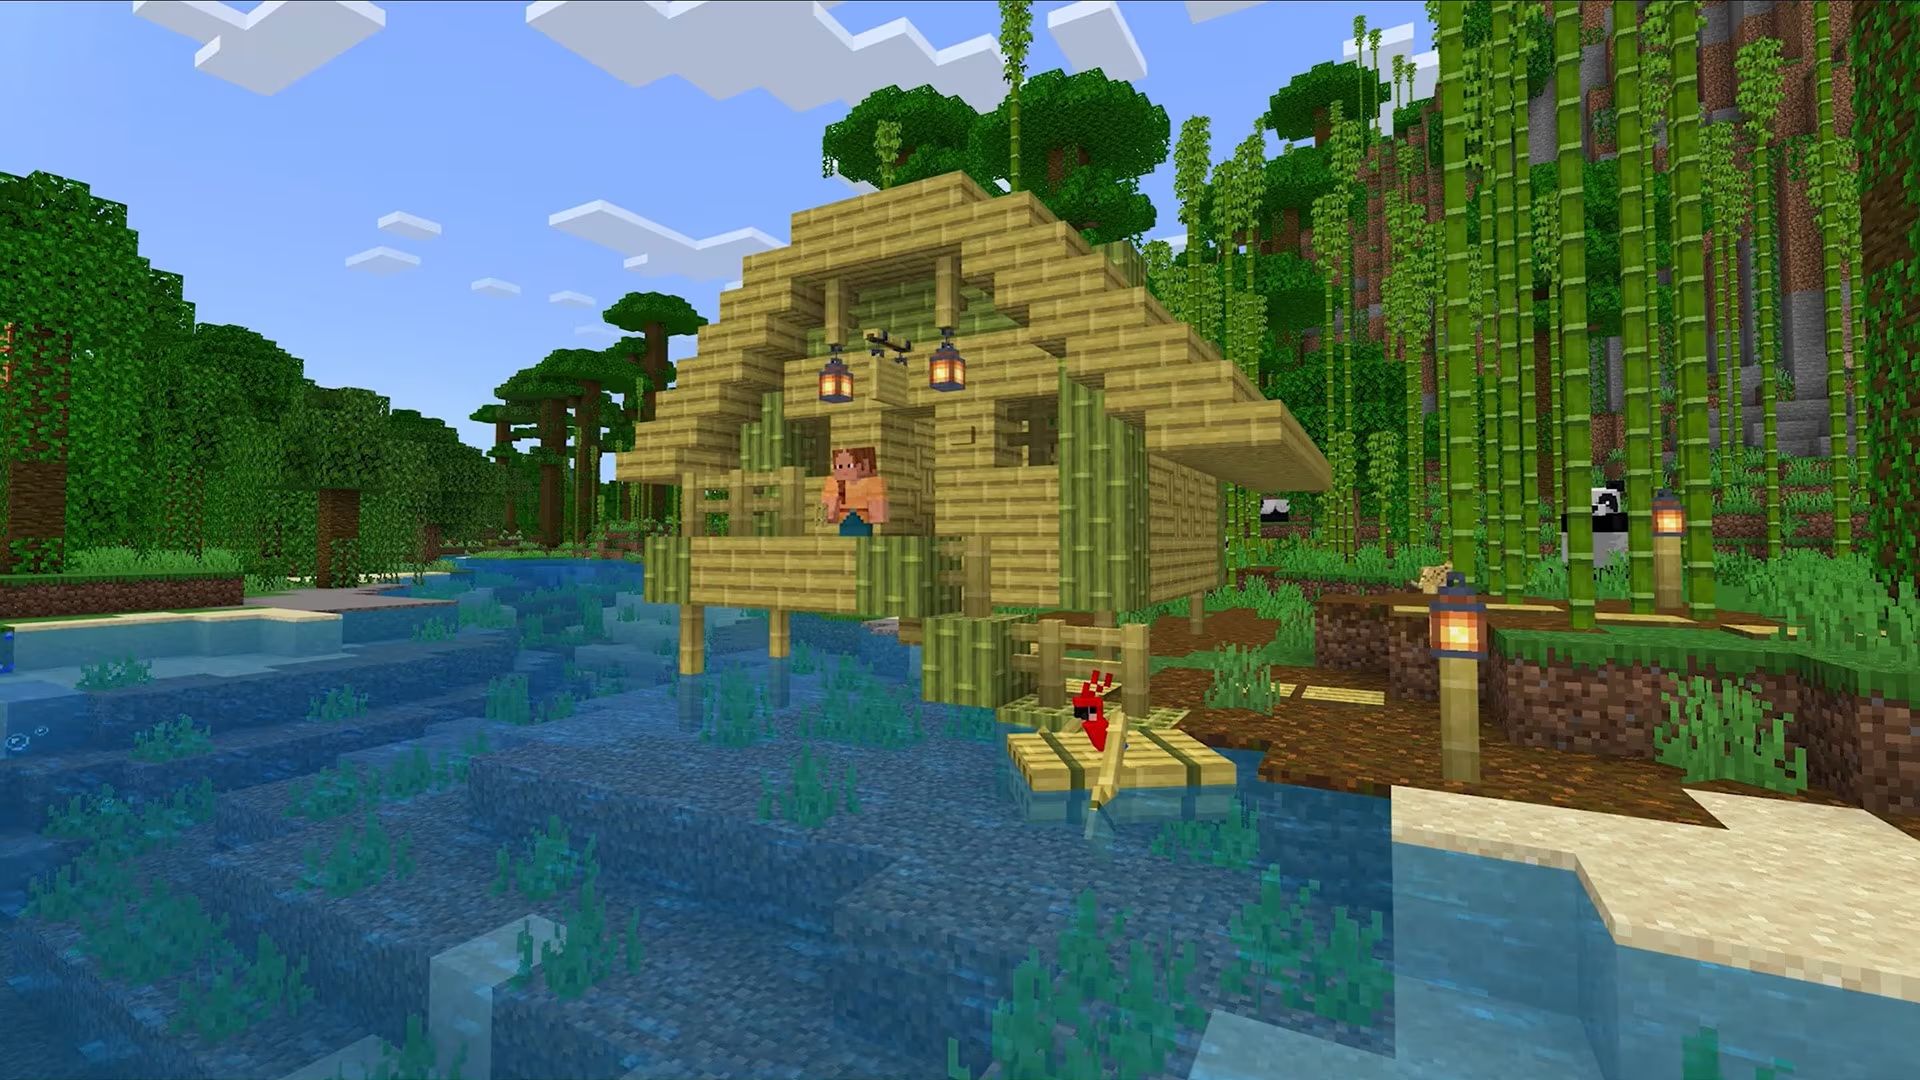 Minecraft Gets Archeology, Cherry Blossoms With New Trails and Tales Update, Out Now